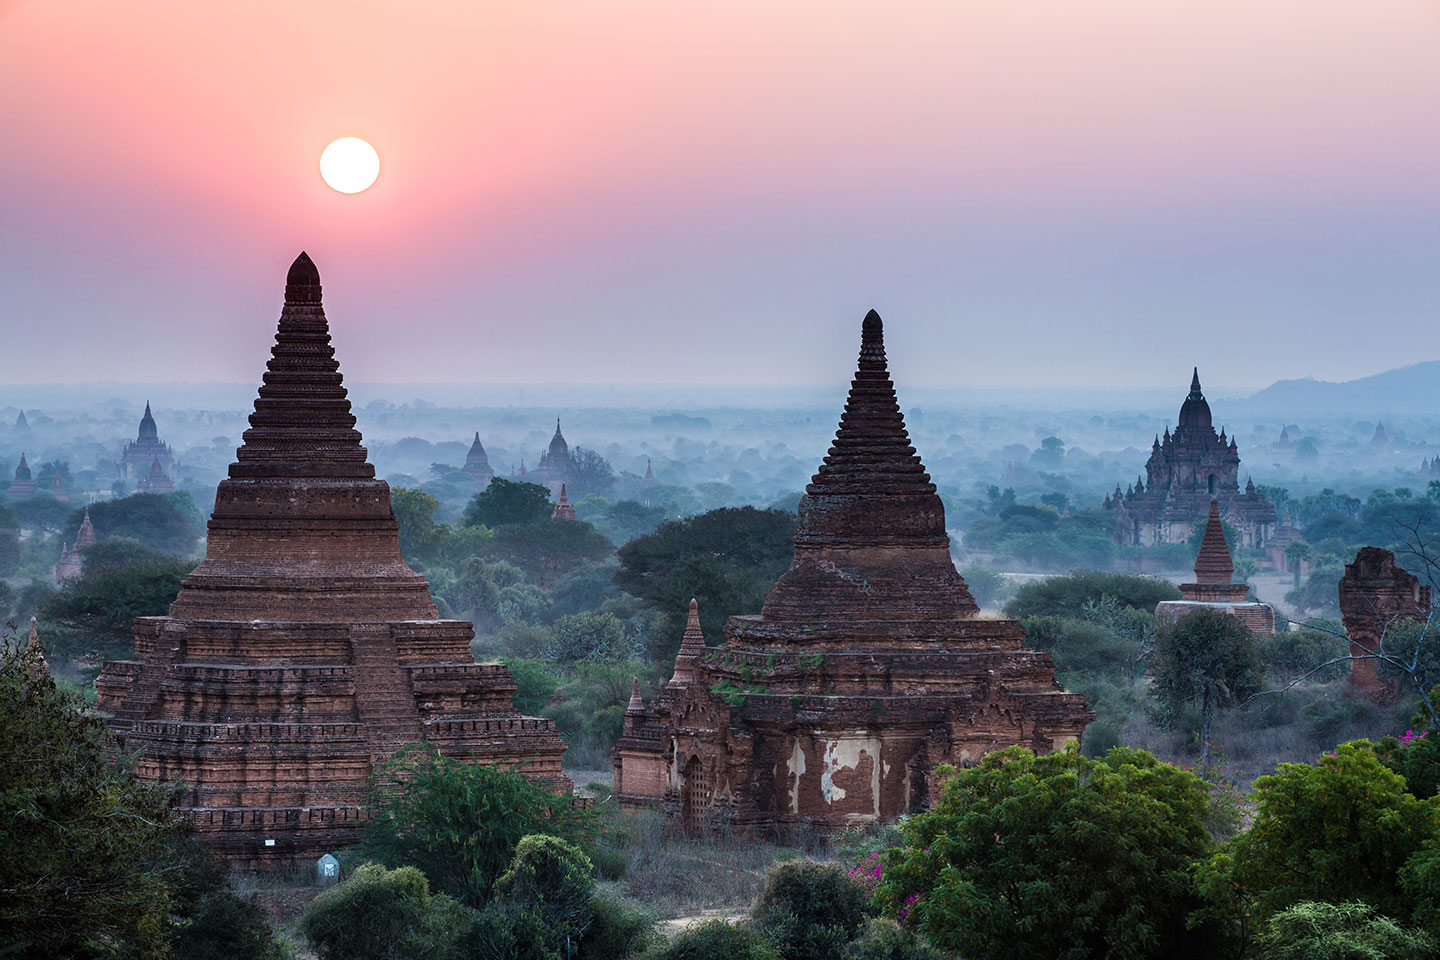 Sunrise from a temple of Bagan, Myanmar